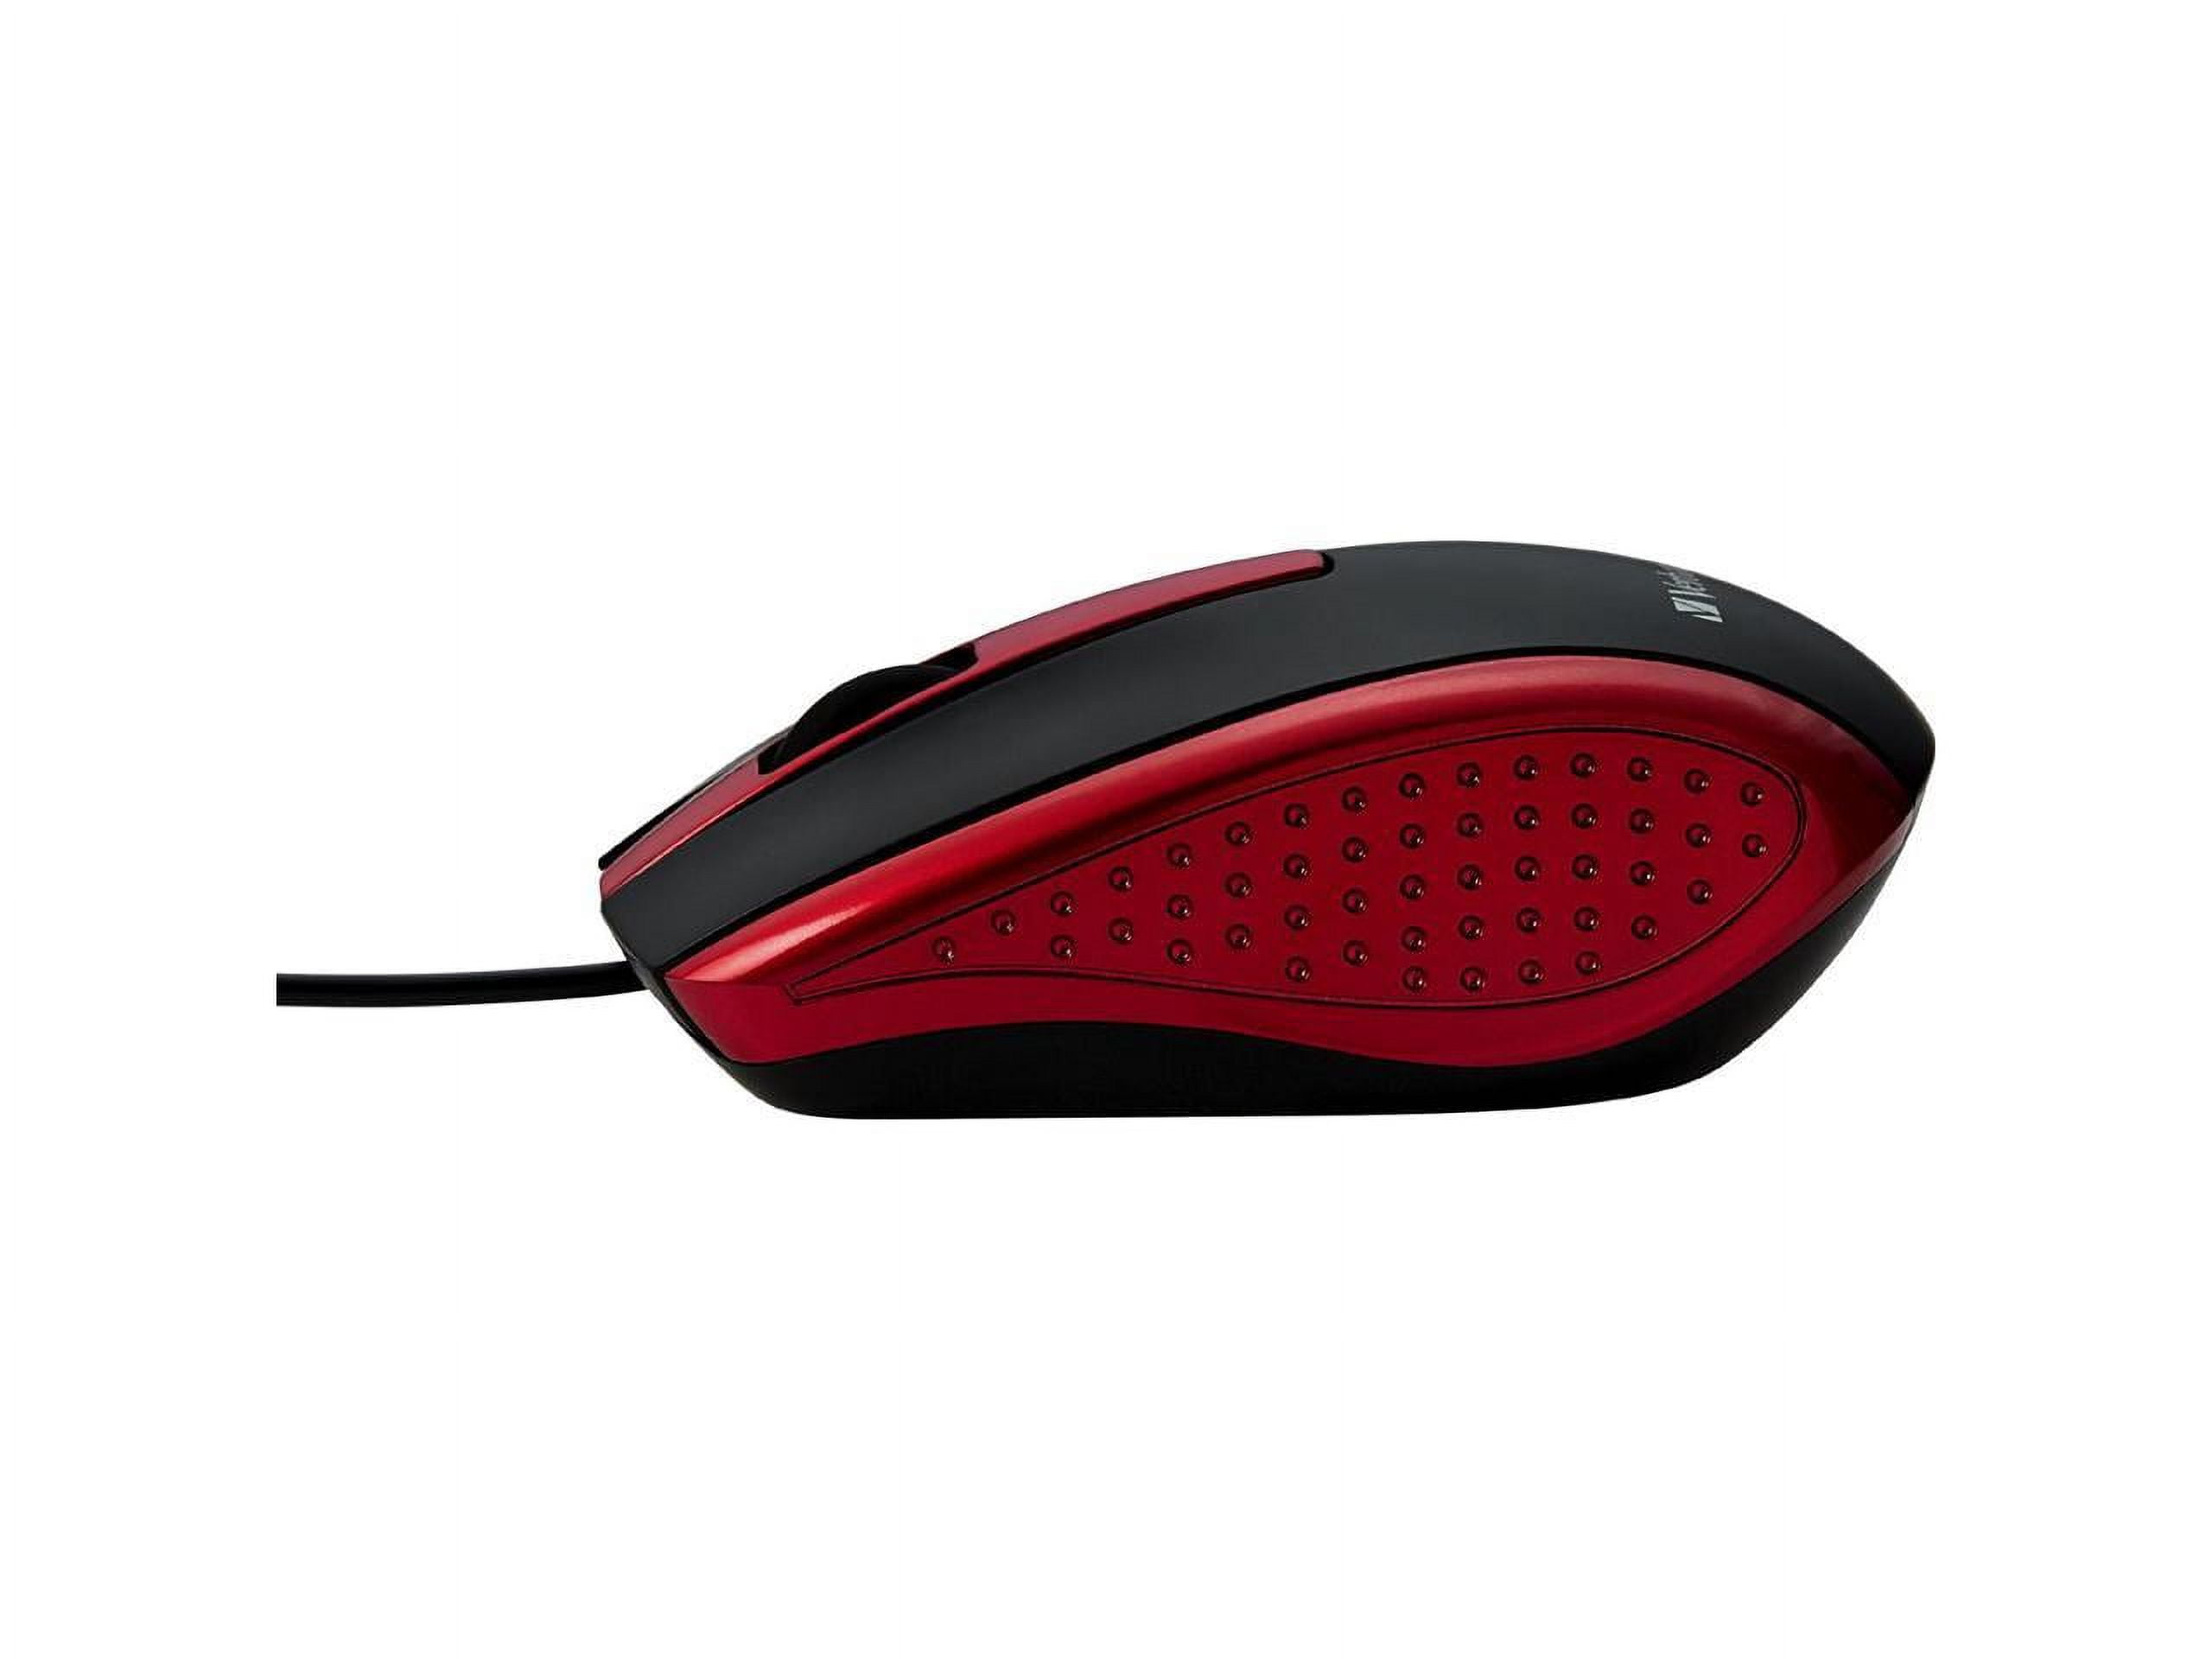 onn. Bluetooth Wireless 6-Button Mouse with Adjustable DPI Button